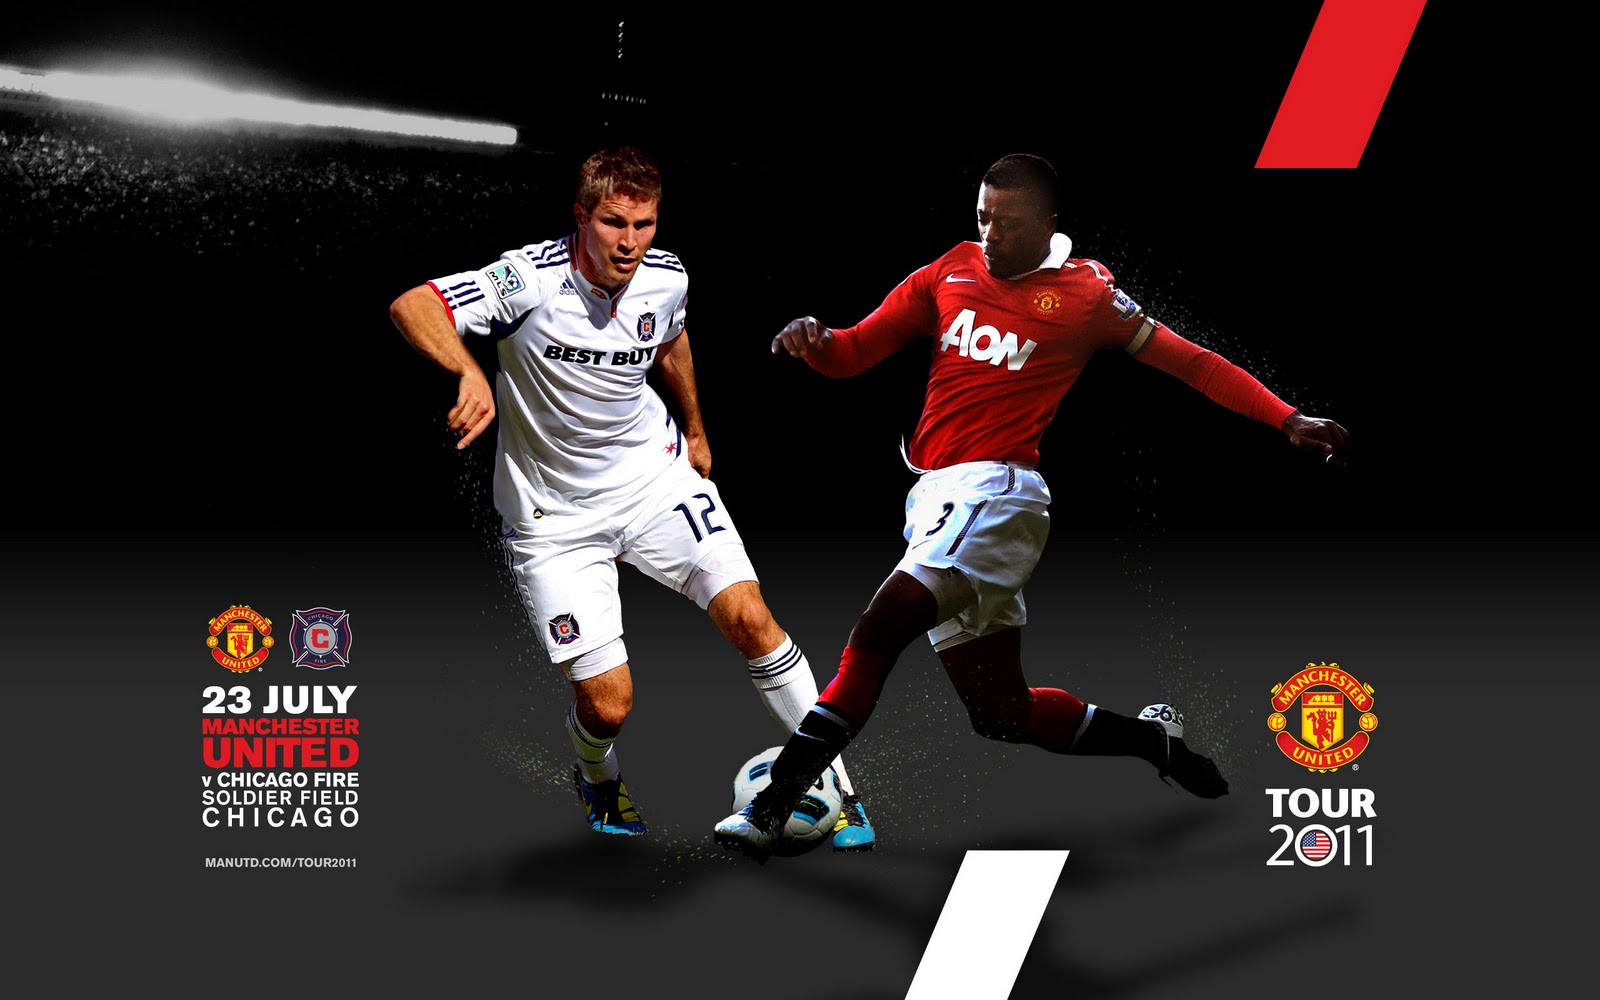 ... 2013/2014 squad wallpaper download | Manchester United Wallpapers